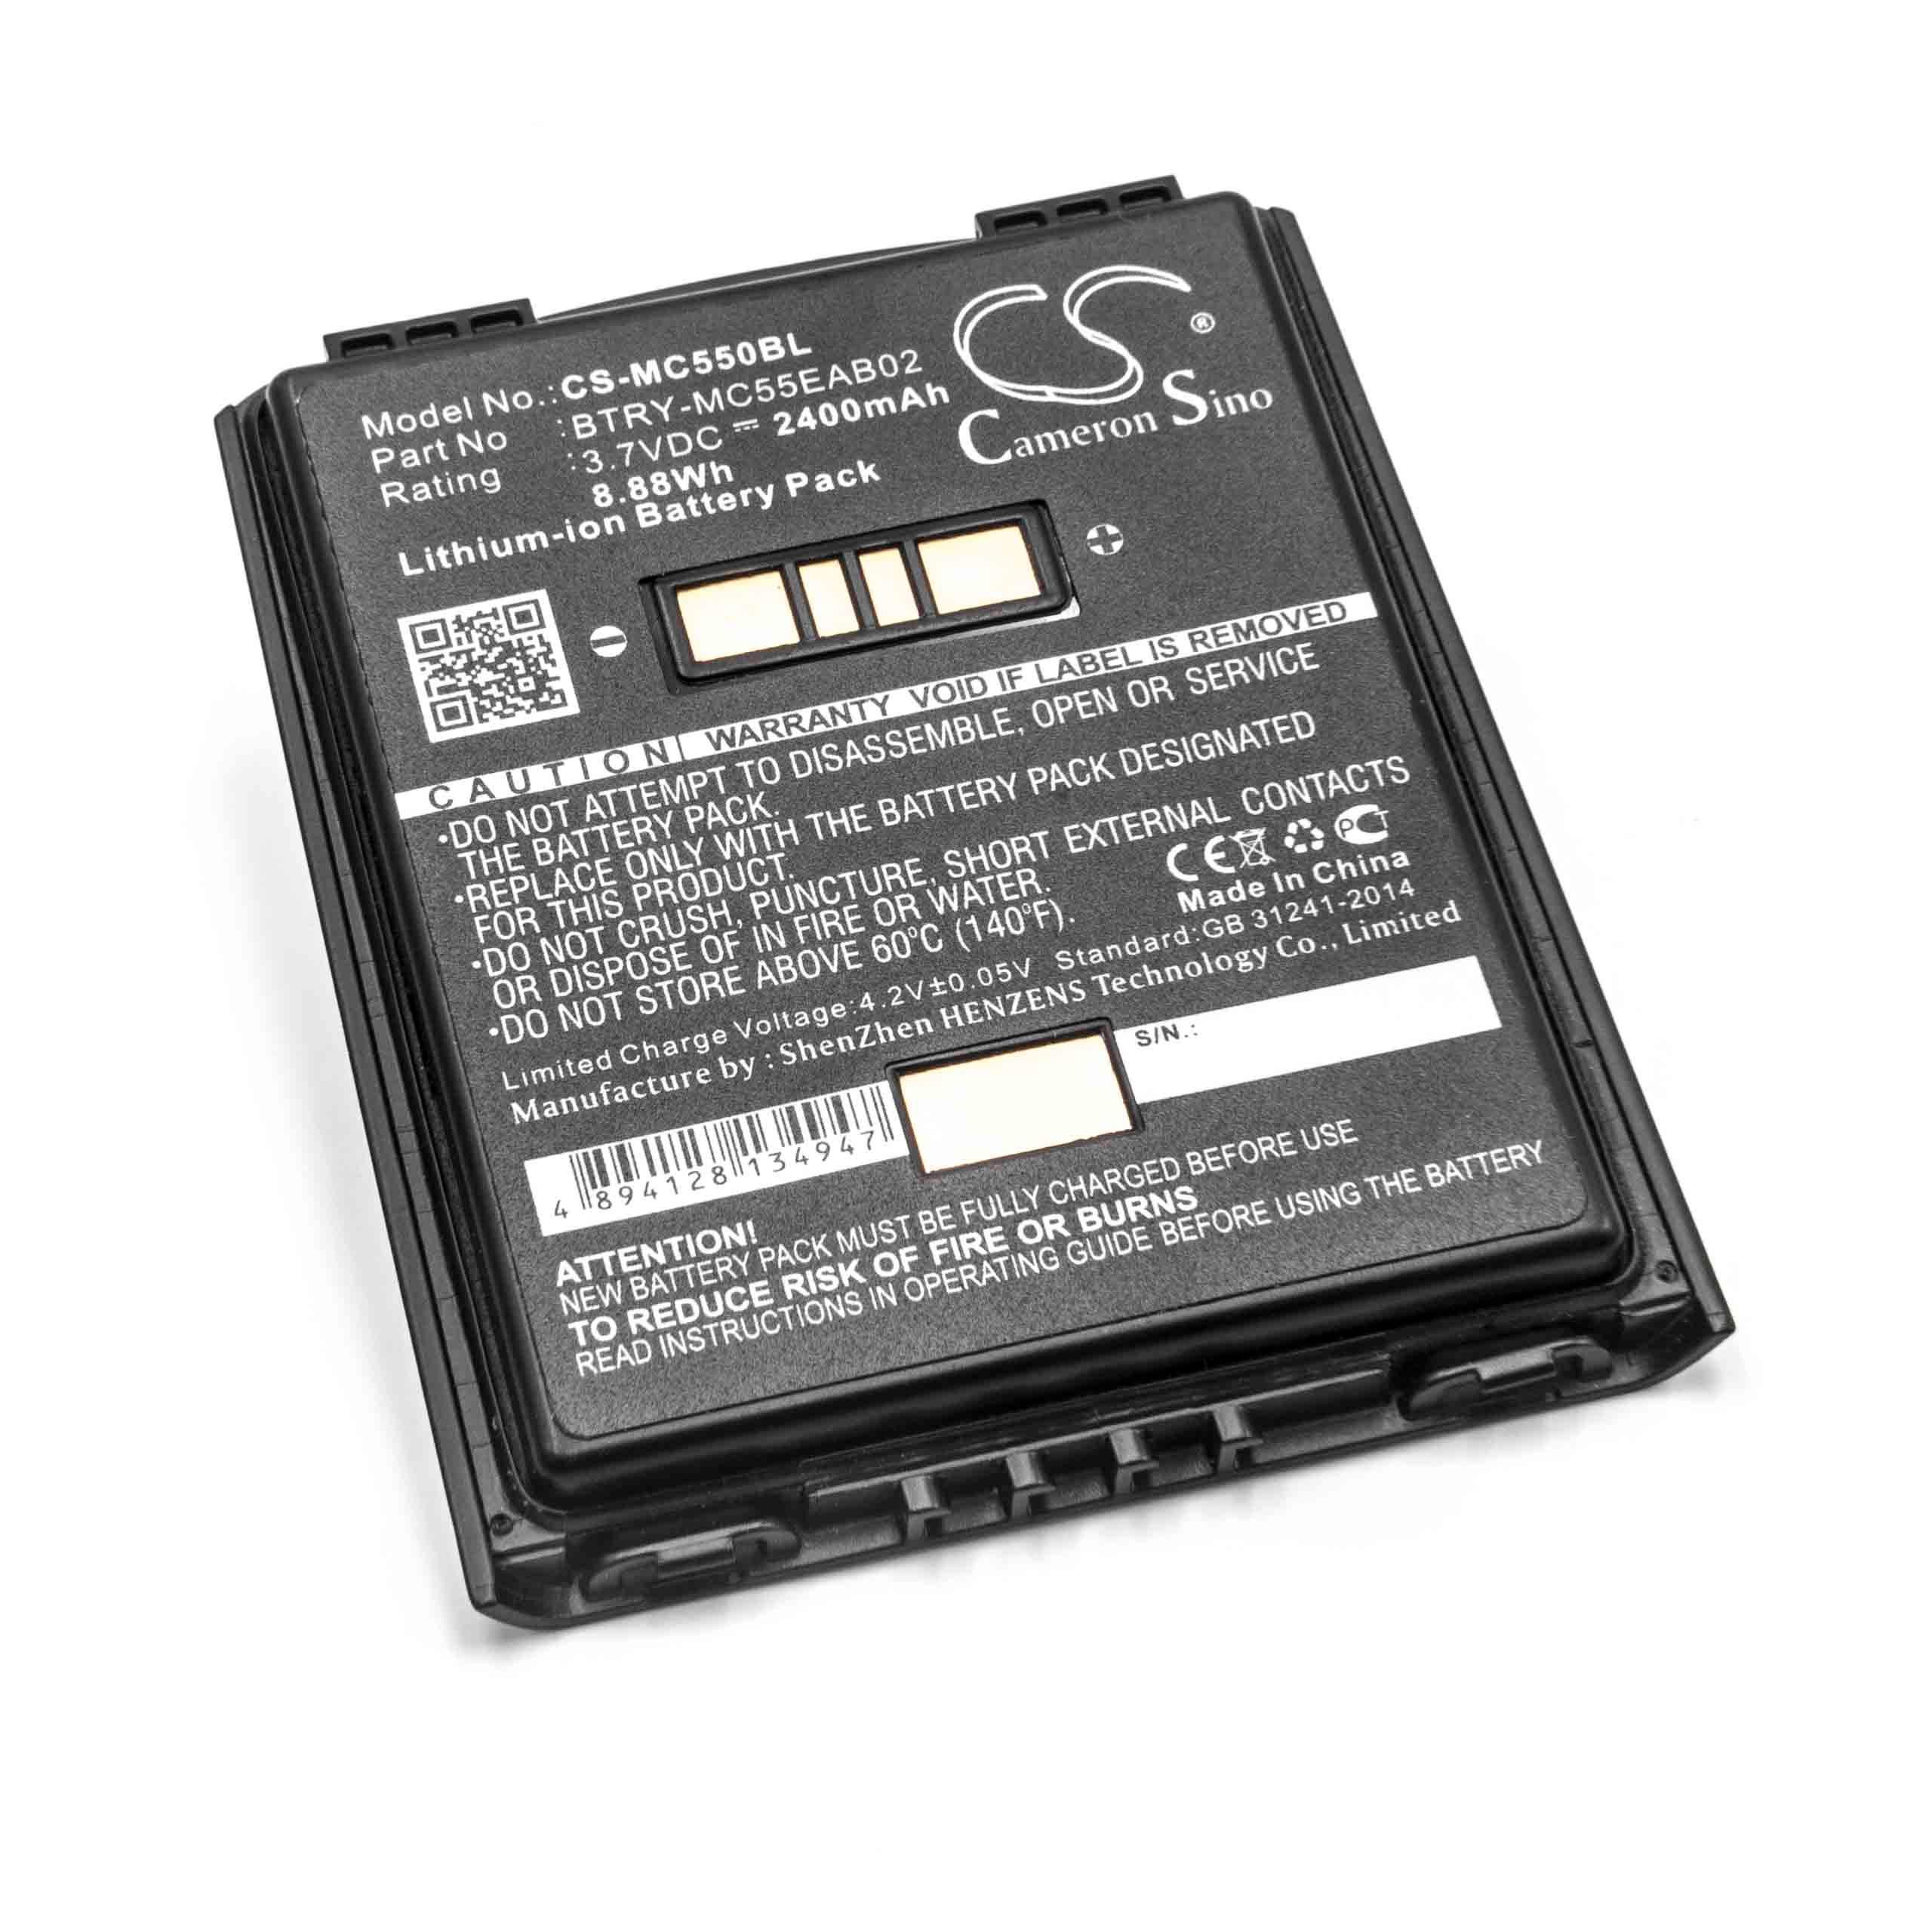 Mobile Computer Battery Replacement for Symbol BTRY-MC55EAB02, 82-111094-01, U60493 - 2400mAh, 3.7V